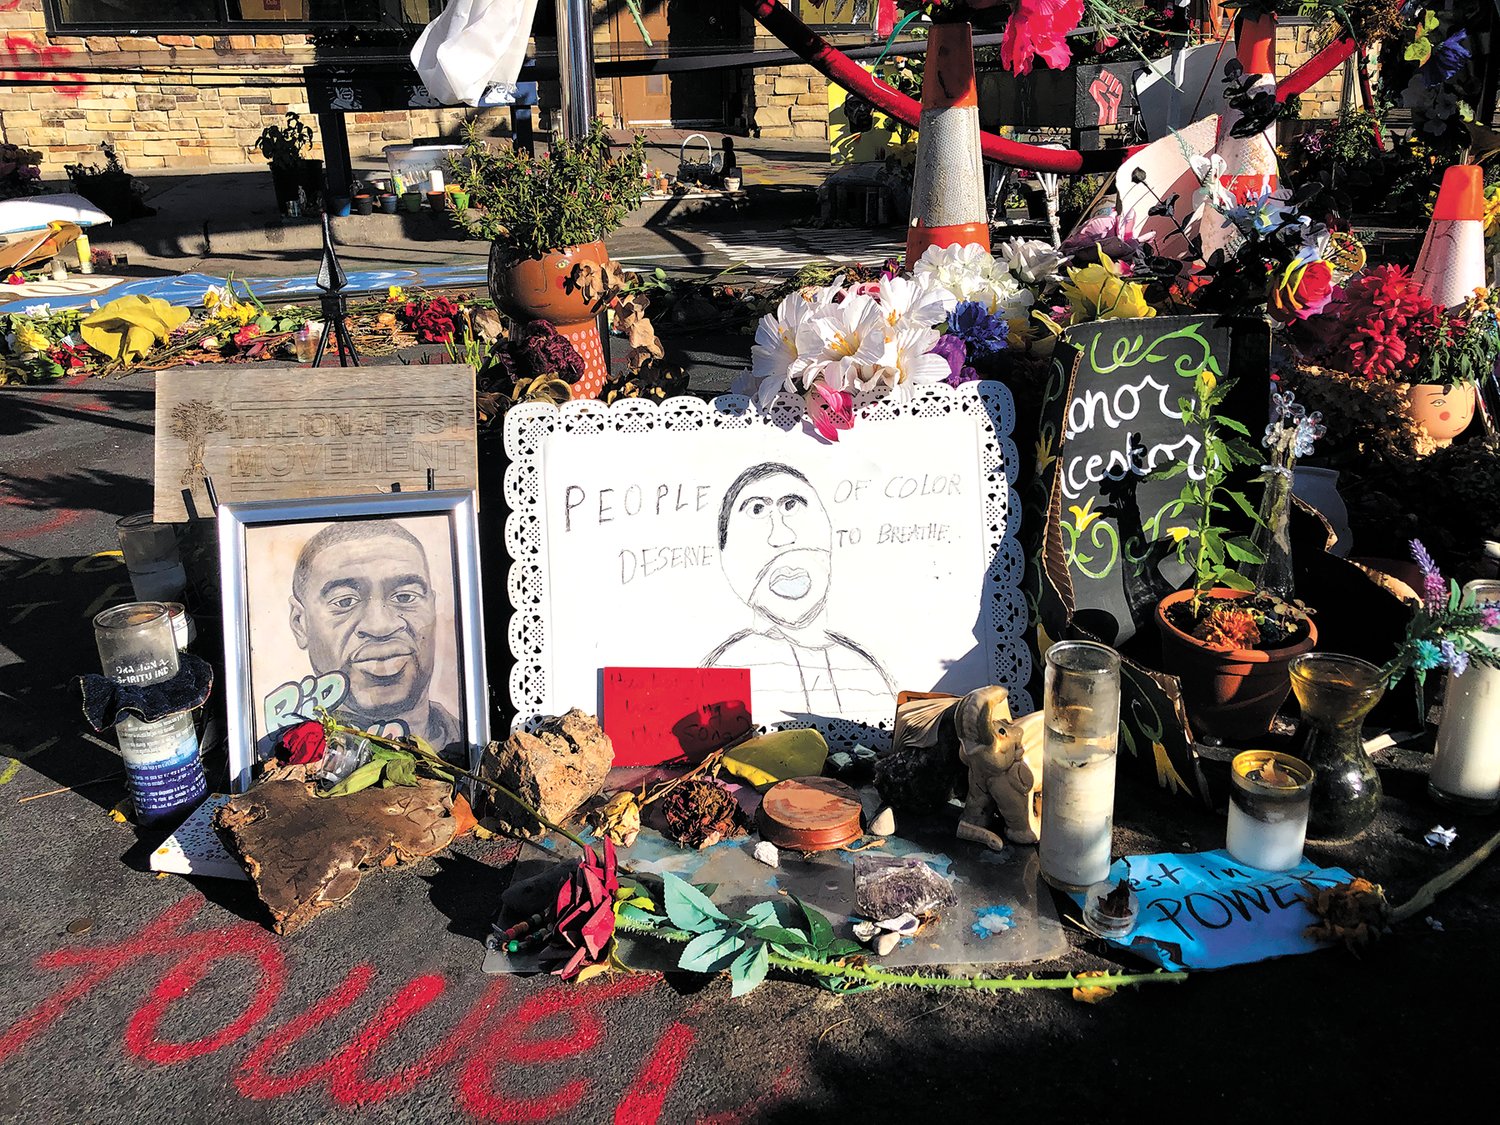 Offerings placed at the George Floyd memorial. Around the drawing in the middle reads “People of Color Deserve to Breathe.” (Photo by Jill Boogren)